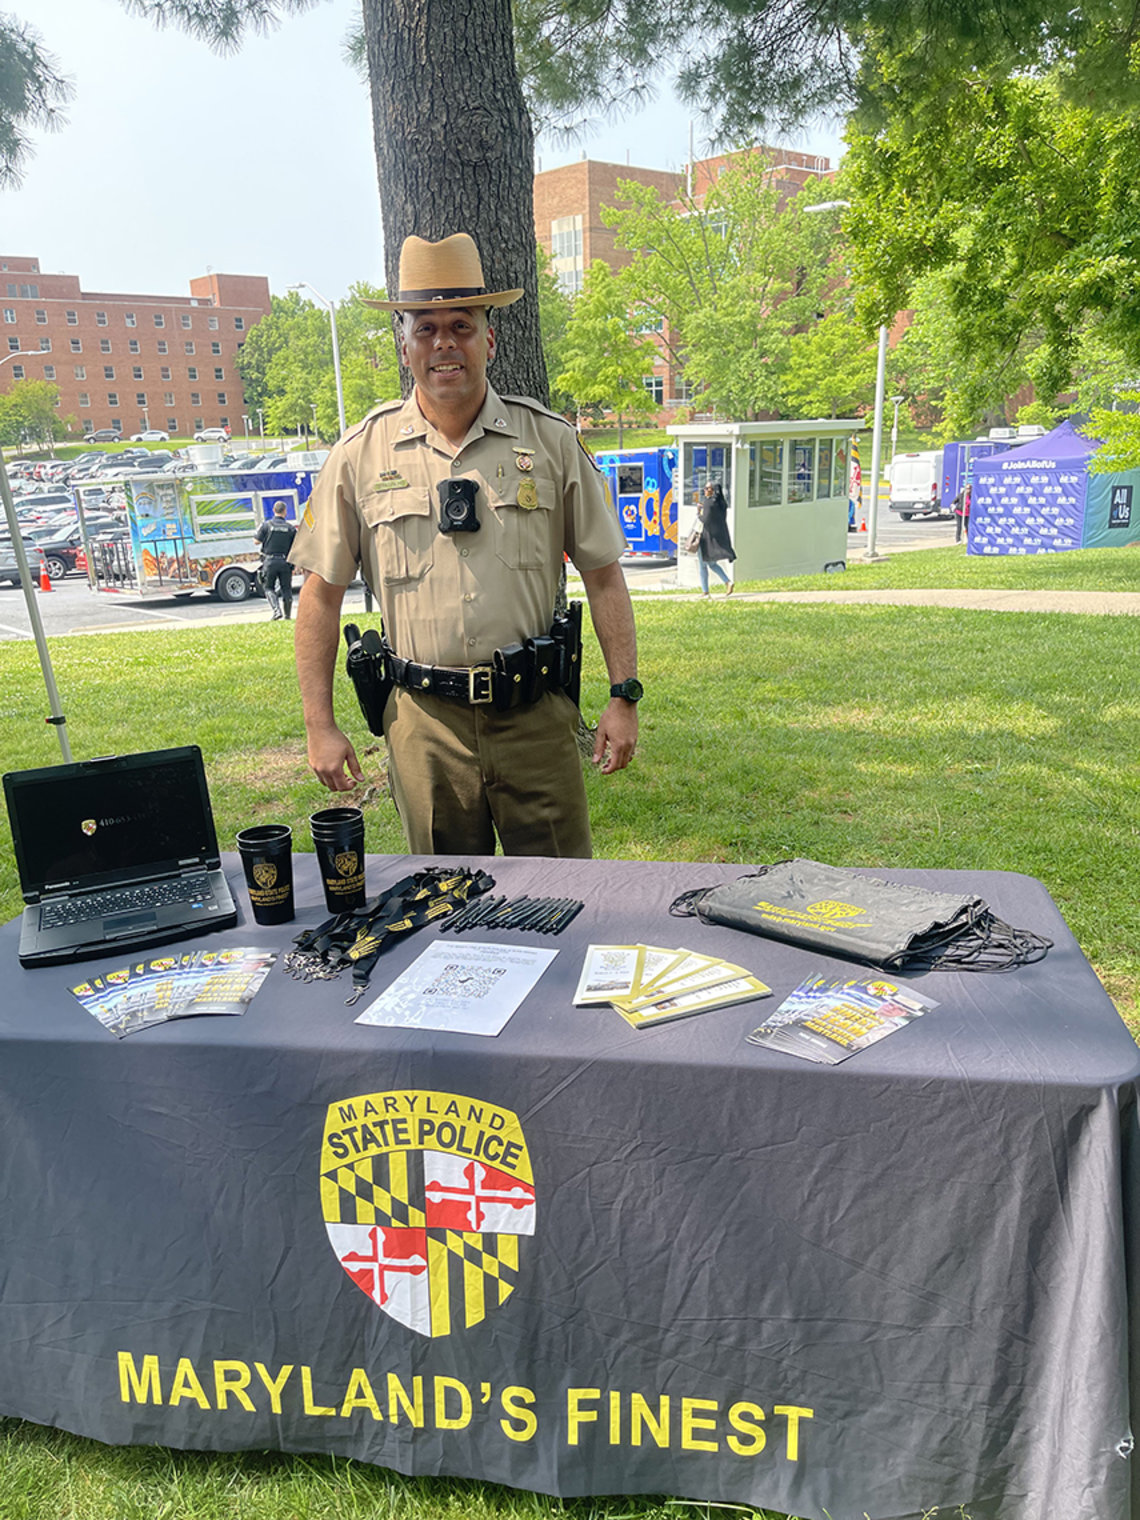 A smiling state trooper stands by info table, with a table covering that reads: Maryland's Finest.